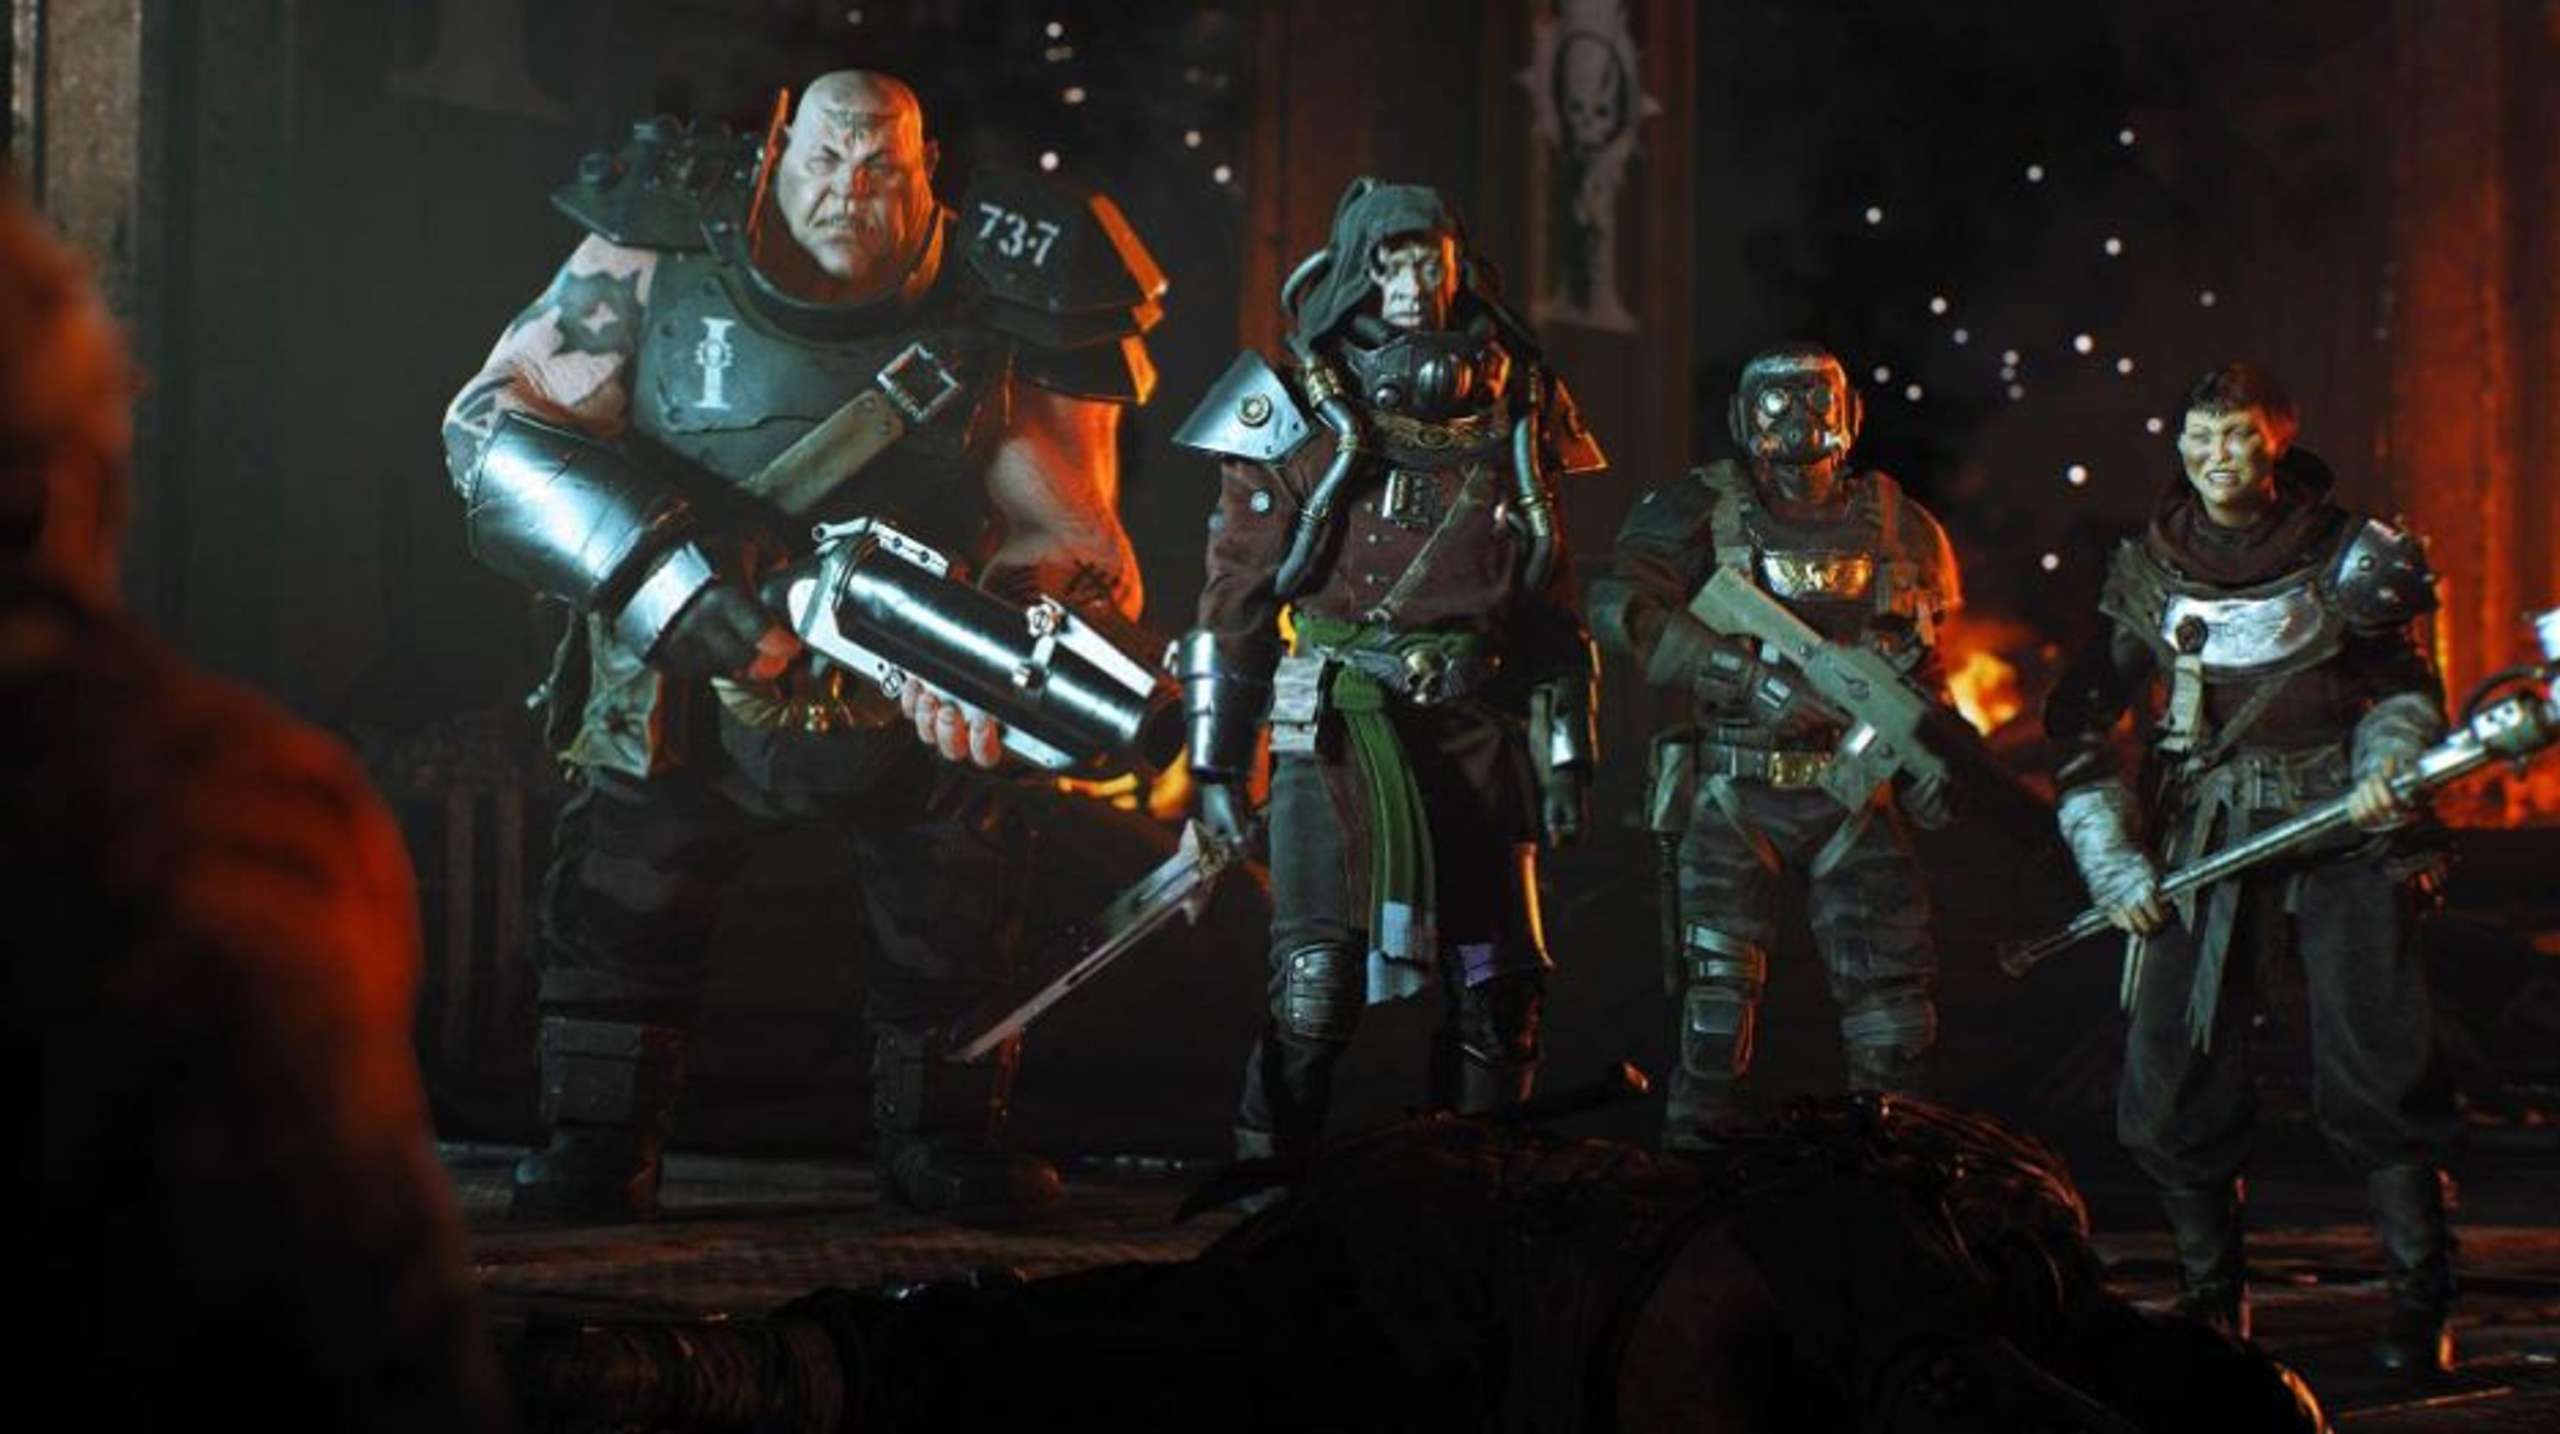 Warhammer 40,000: Darktide Will Be Published A Few Months Later After Being Postponed Once More